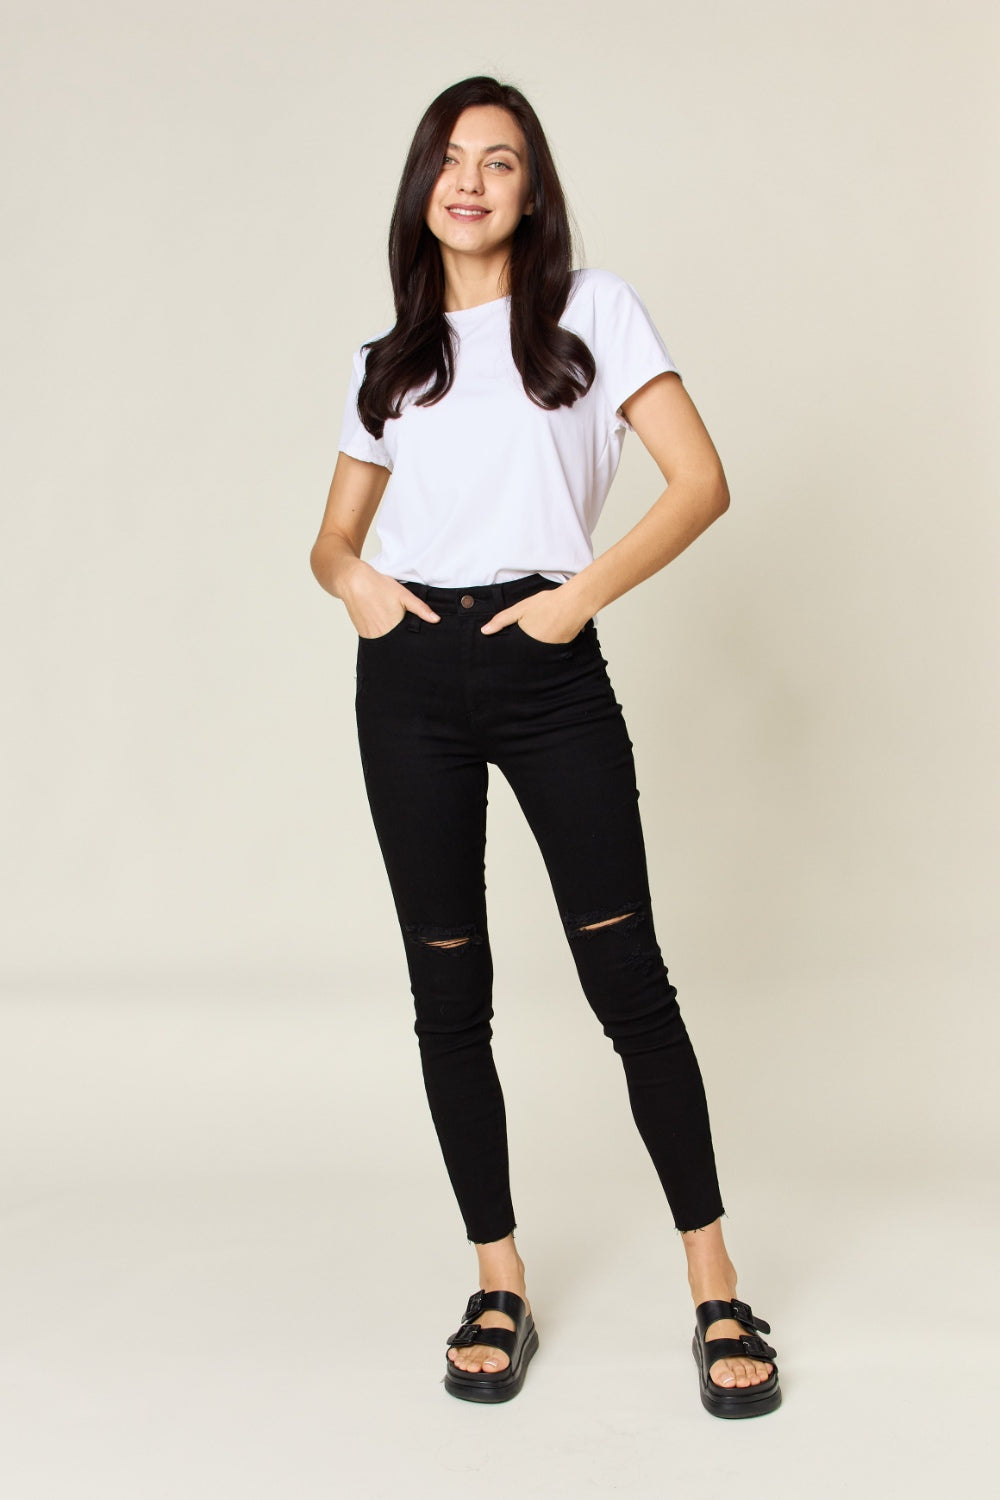 Judy Blue High-Waist Distressed Ankle Skinny Jeans